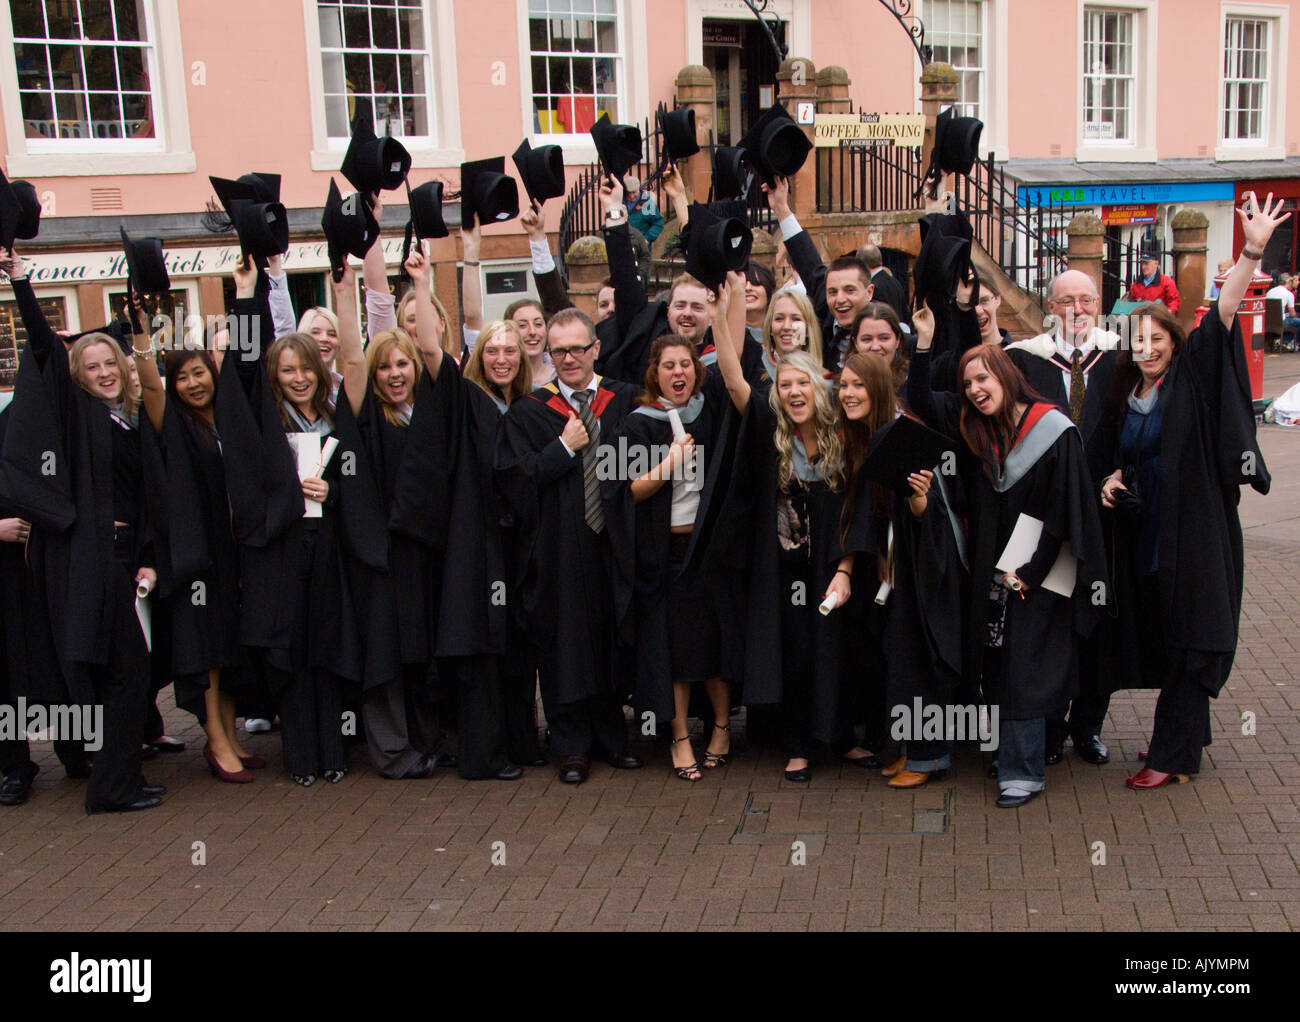 Group of happy student and staff throwing hats into air after graduation ceremony University of Cumbria Carlisle England Stock Photo